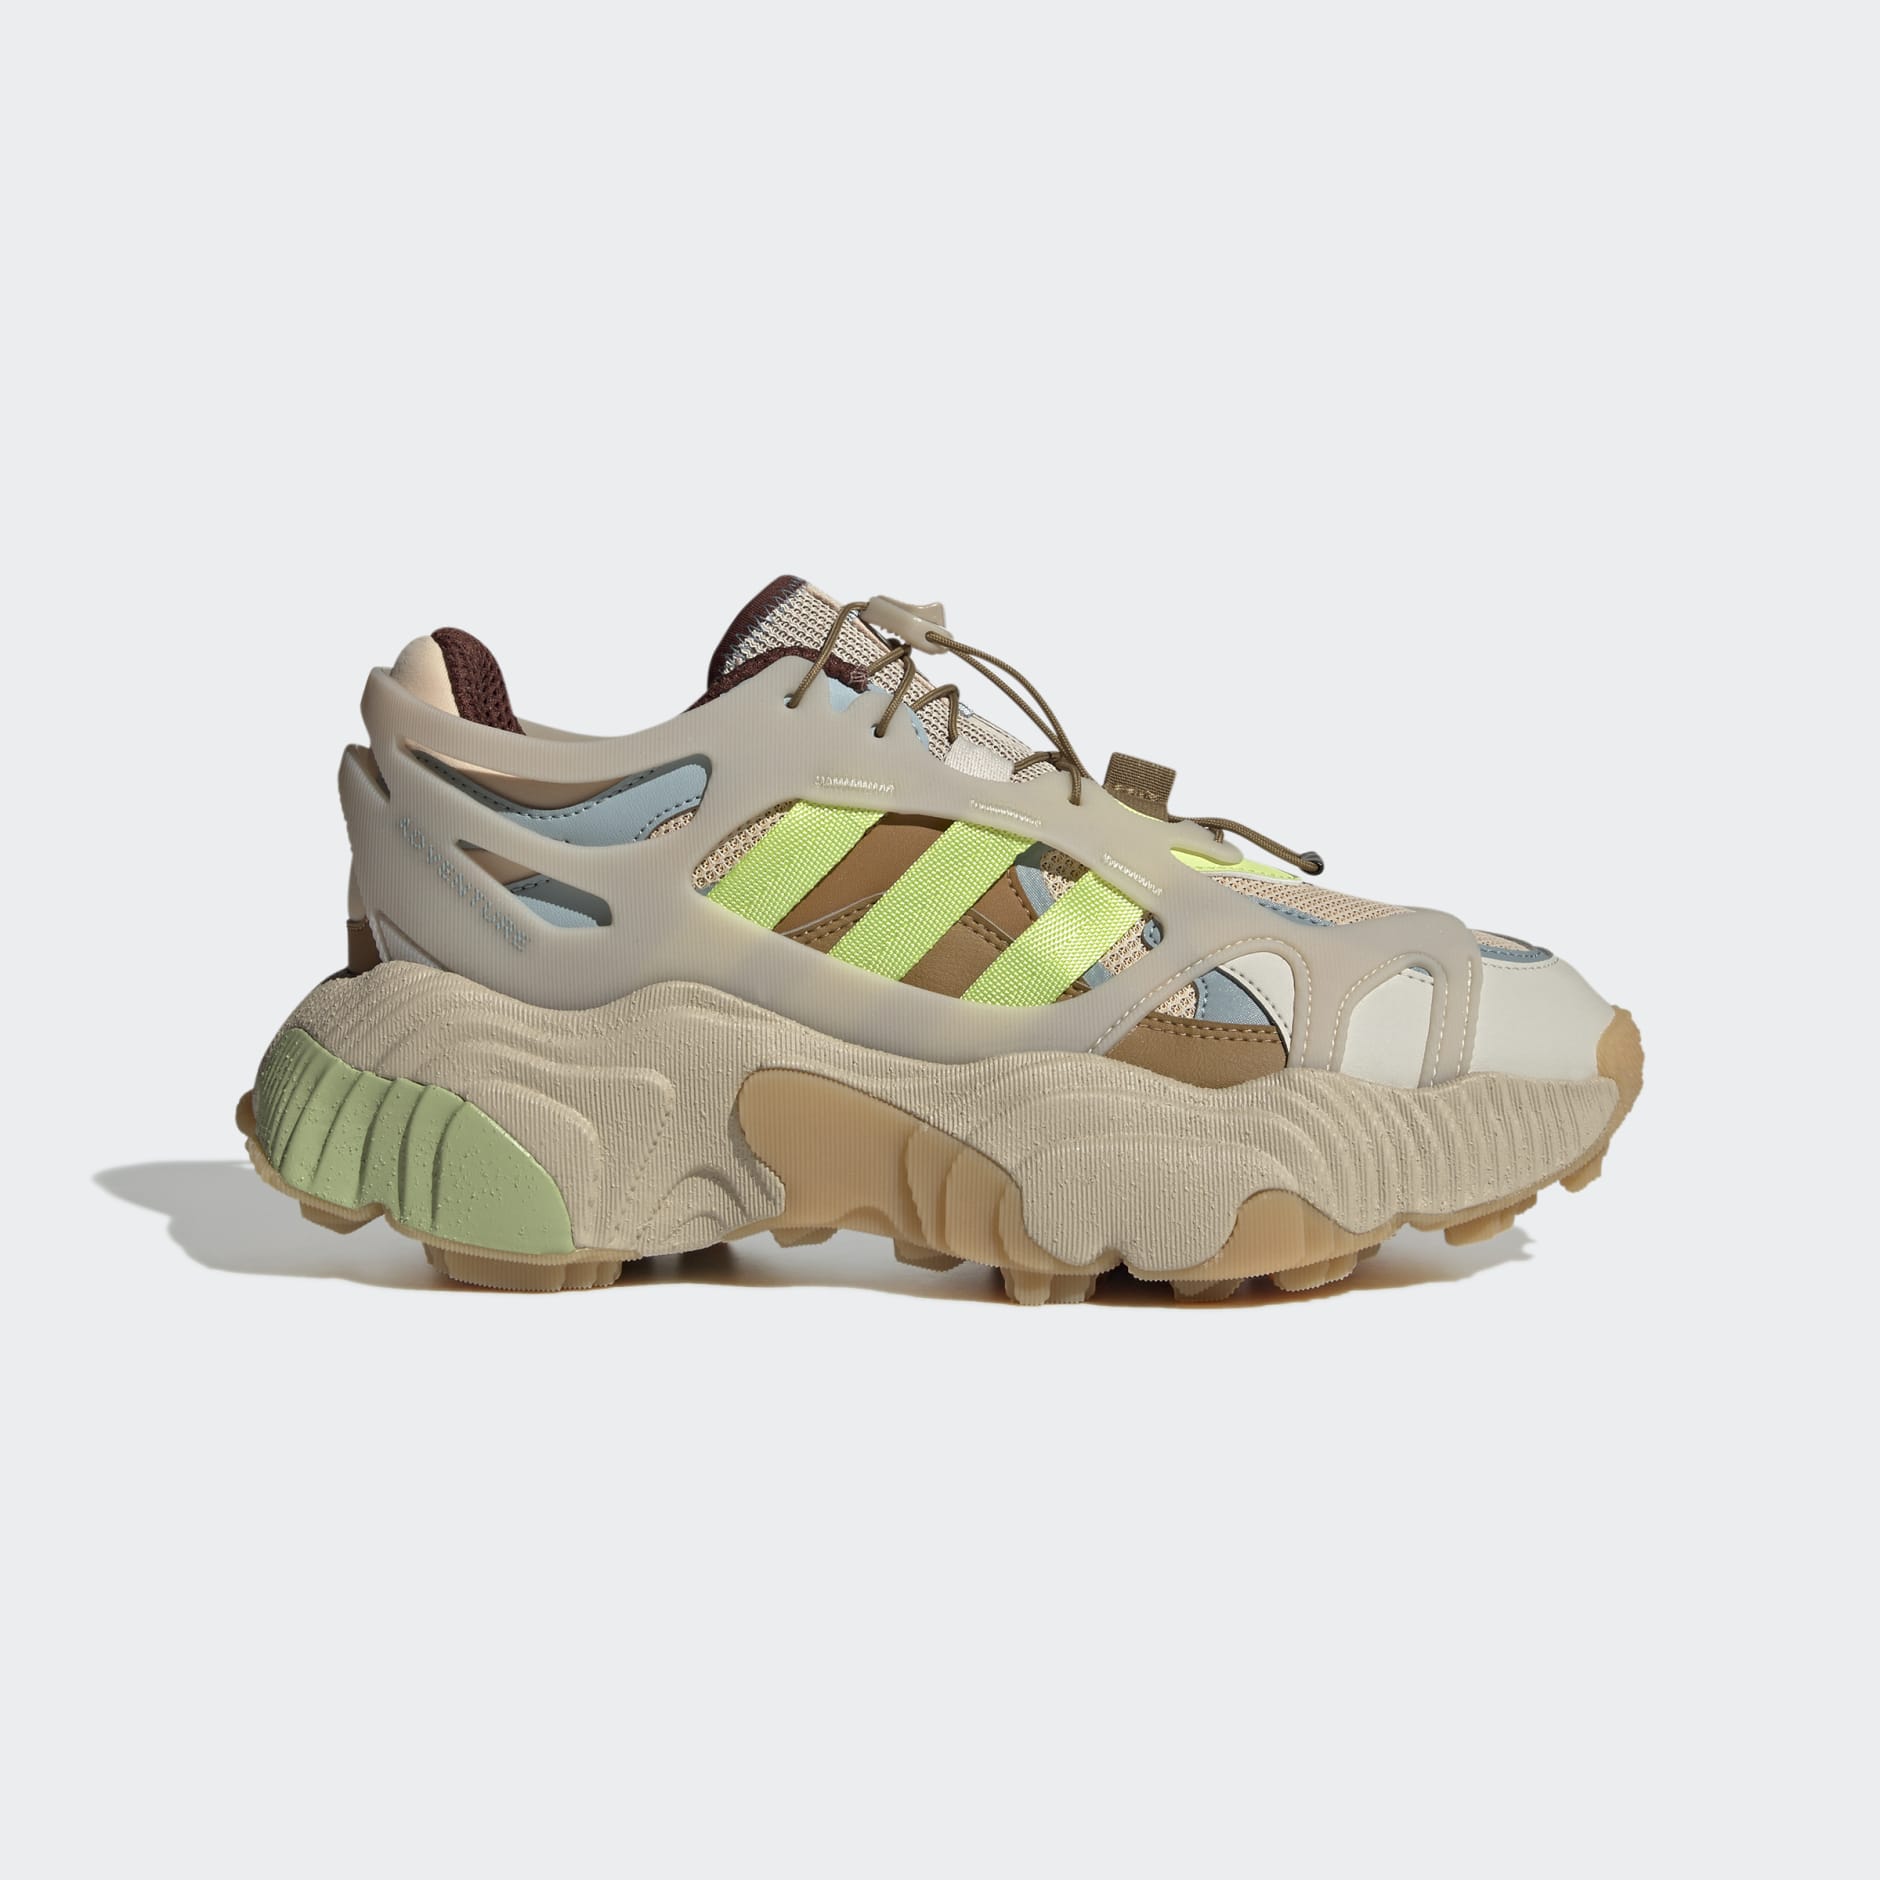 Kirken Silicon investering adidas Roverend Adventure Shoes - Pink | adidas OM